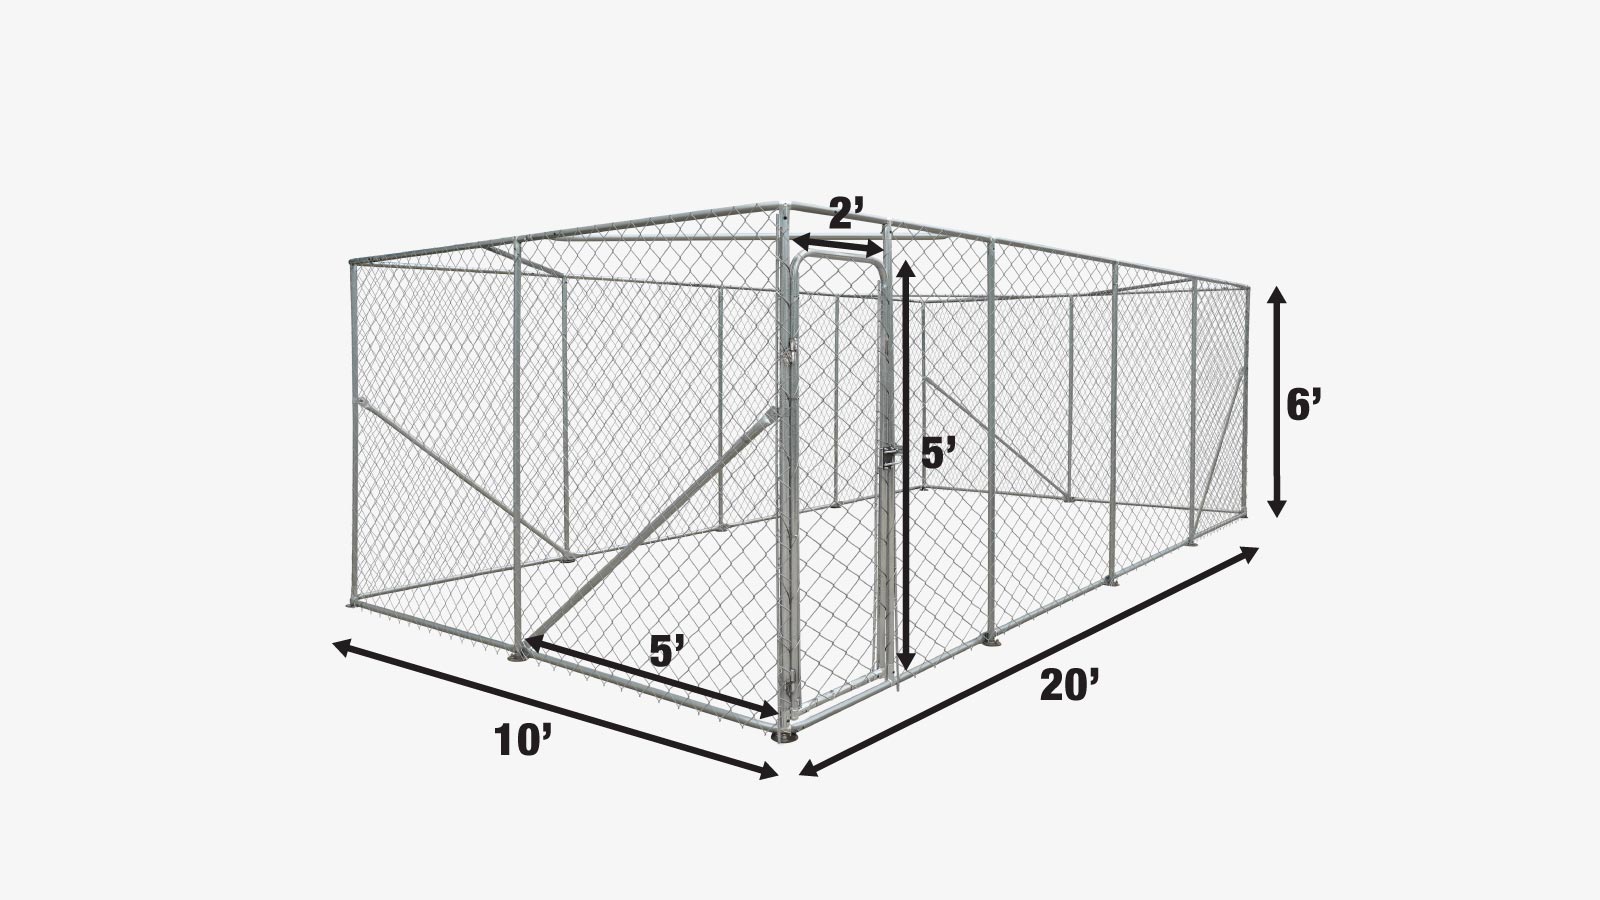 TMG Industrial 10’ x 20’ Outdoor Dog Kennel Playpen, Outdoor Dog Runner, Pet Exercise House, Lockable Gate, 6’ Chain-Link Fence, TMG-DCP1020-specifications-image